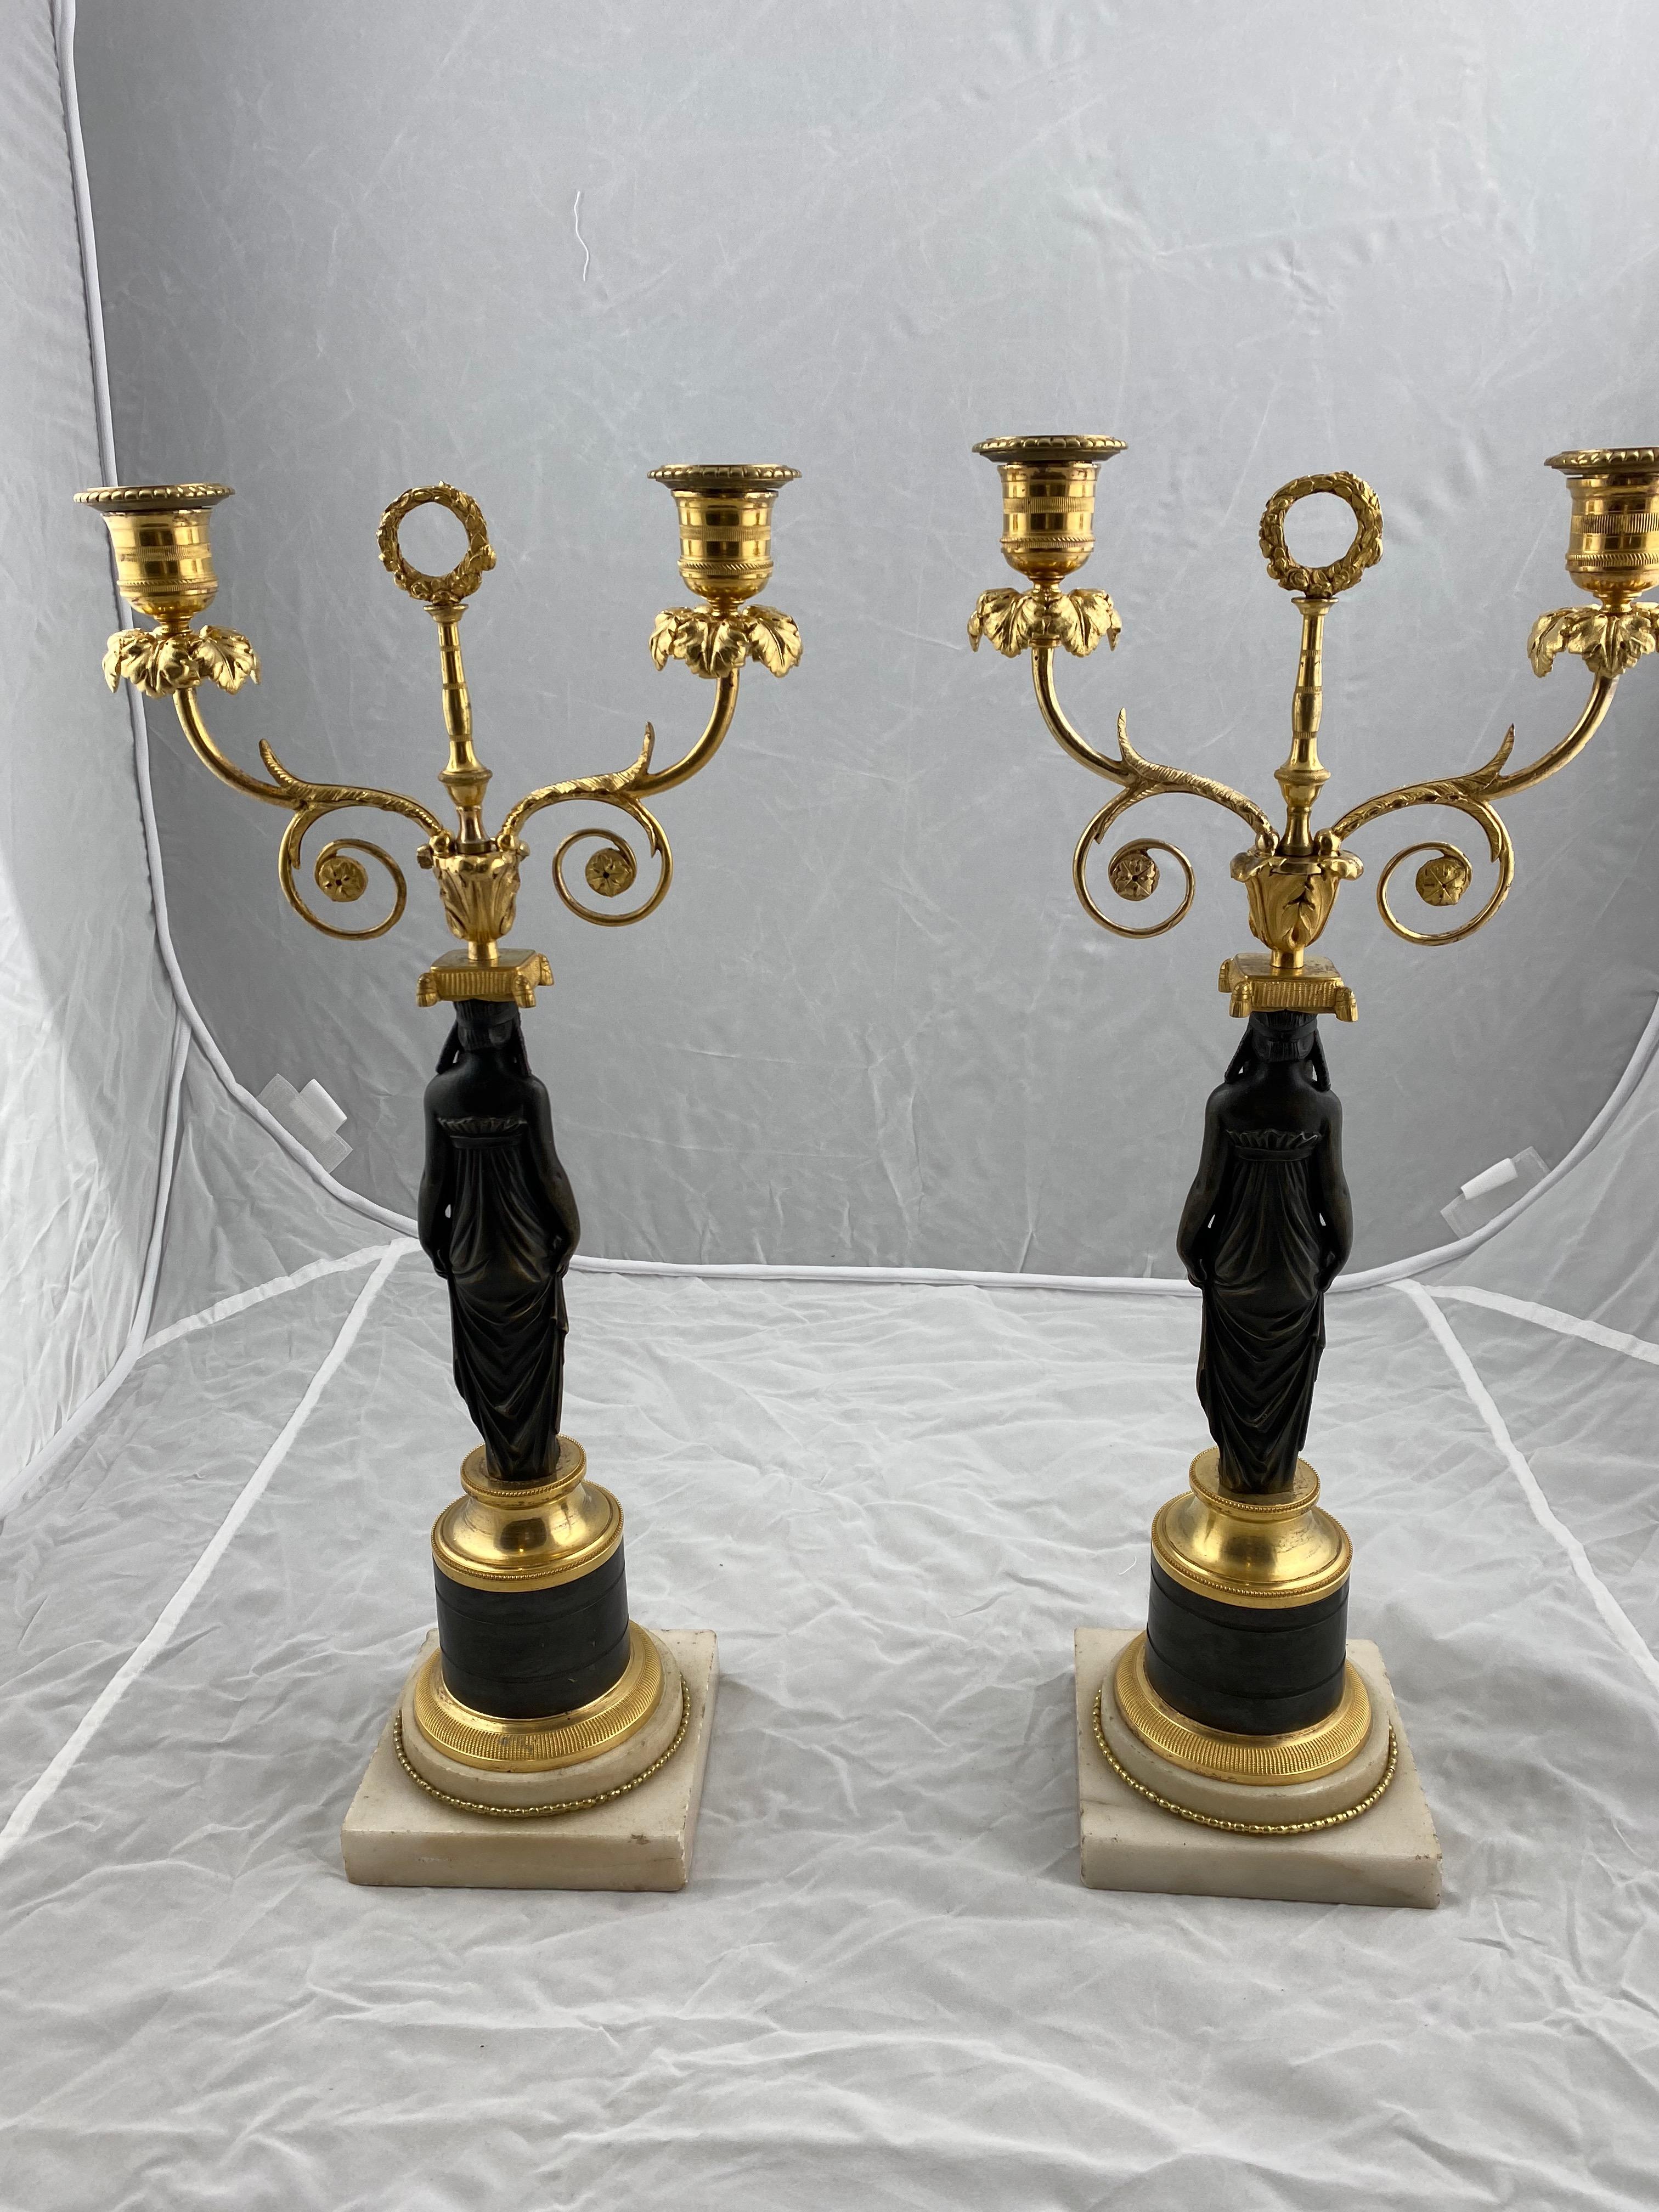 Pair of Late 18th Century Candelabras 1